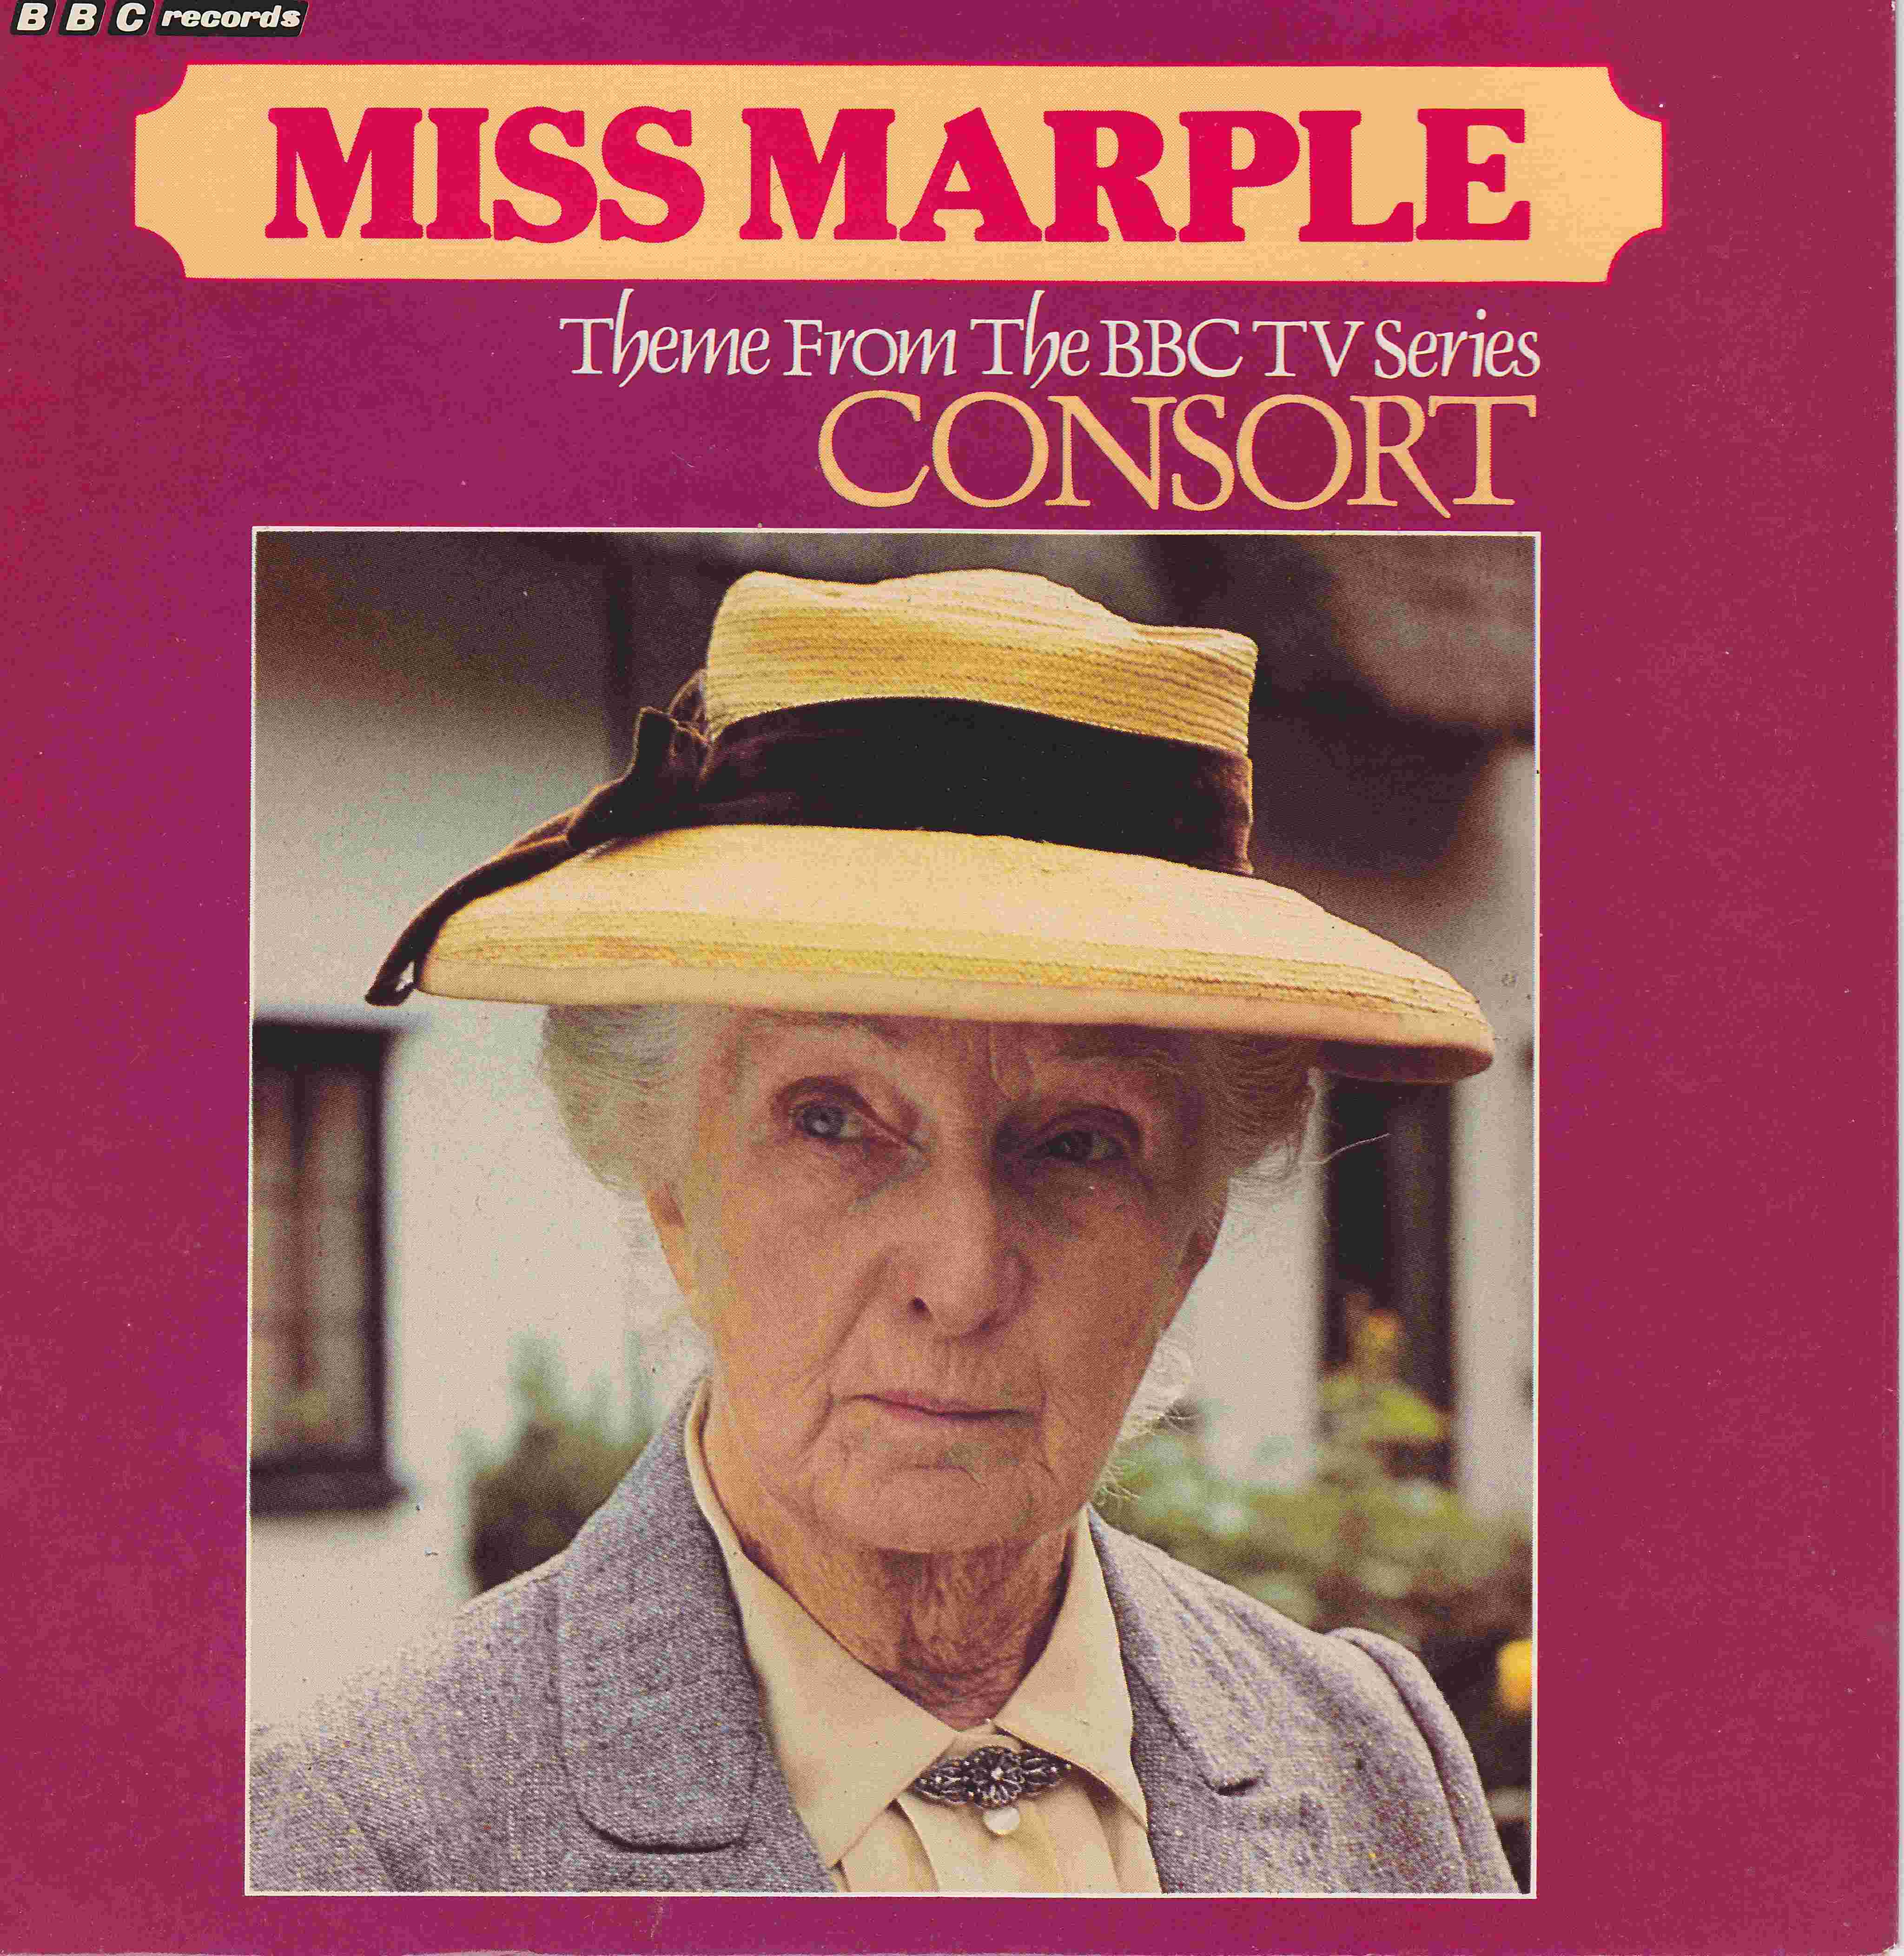 Picture of RESL 153 Miss Marple by artist Consort from the BBC records and Tapes library